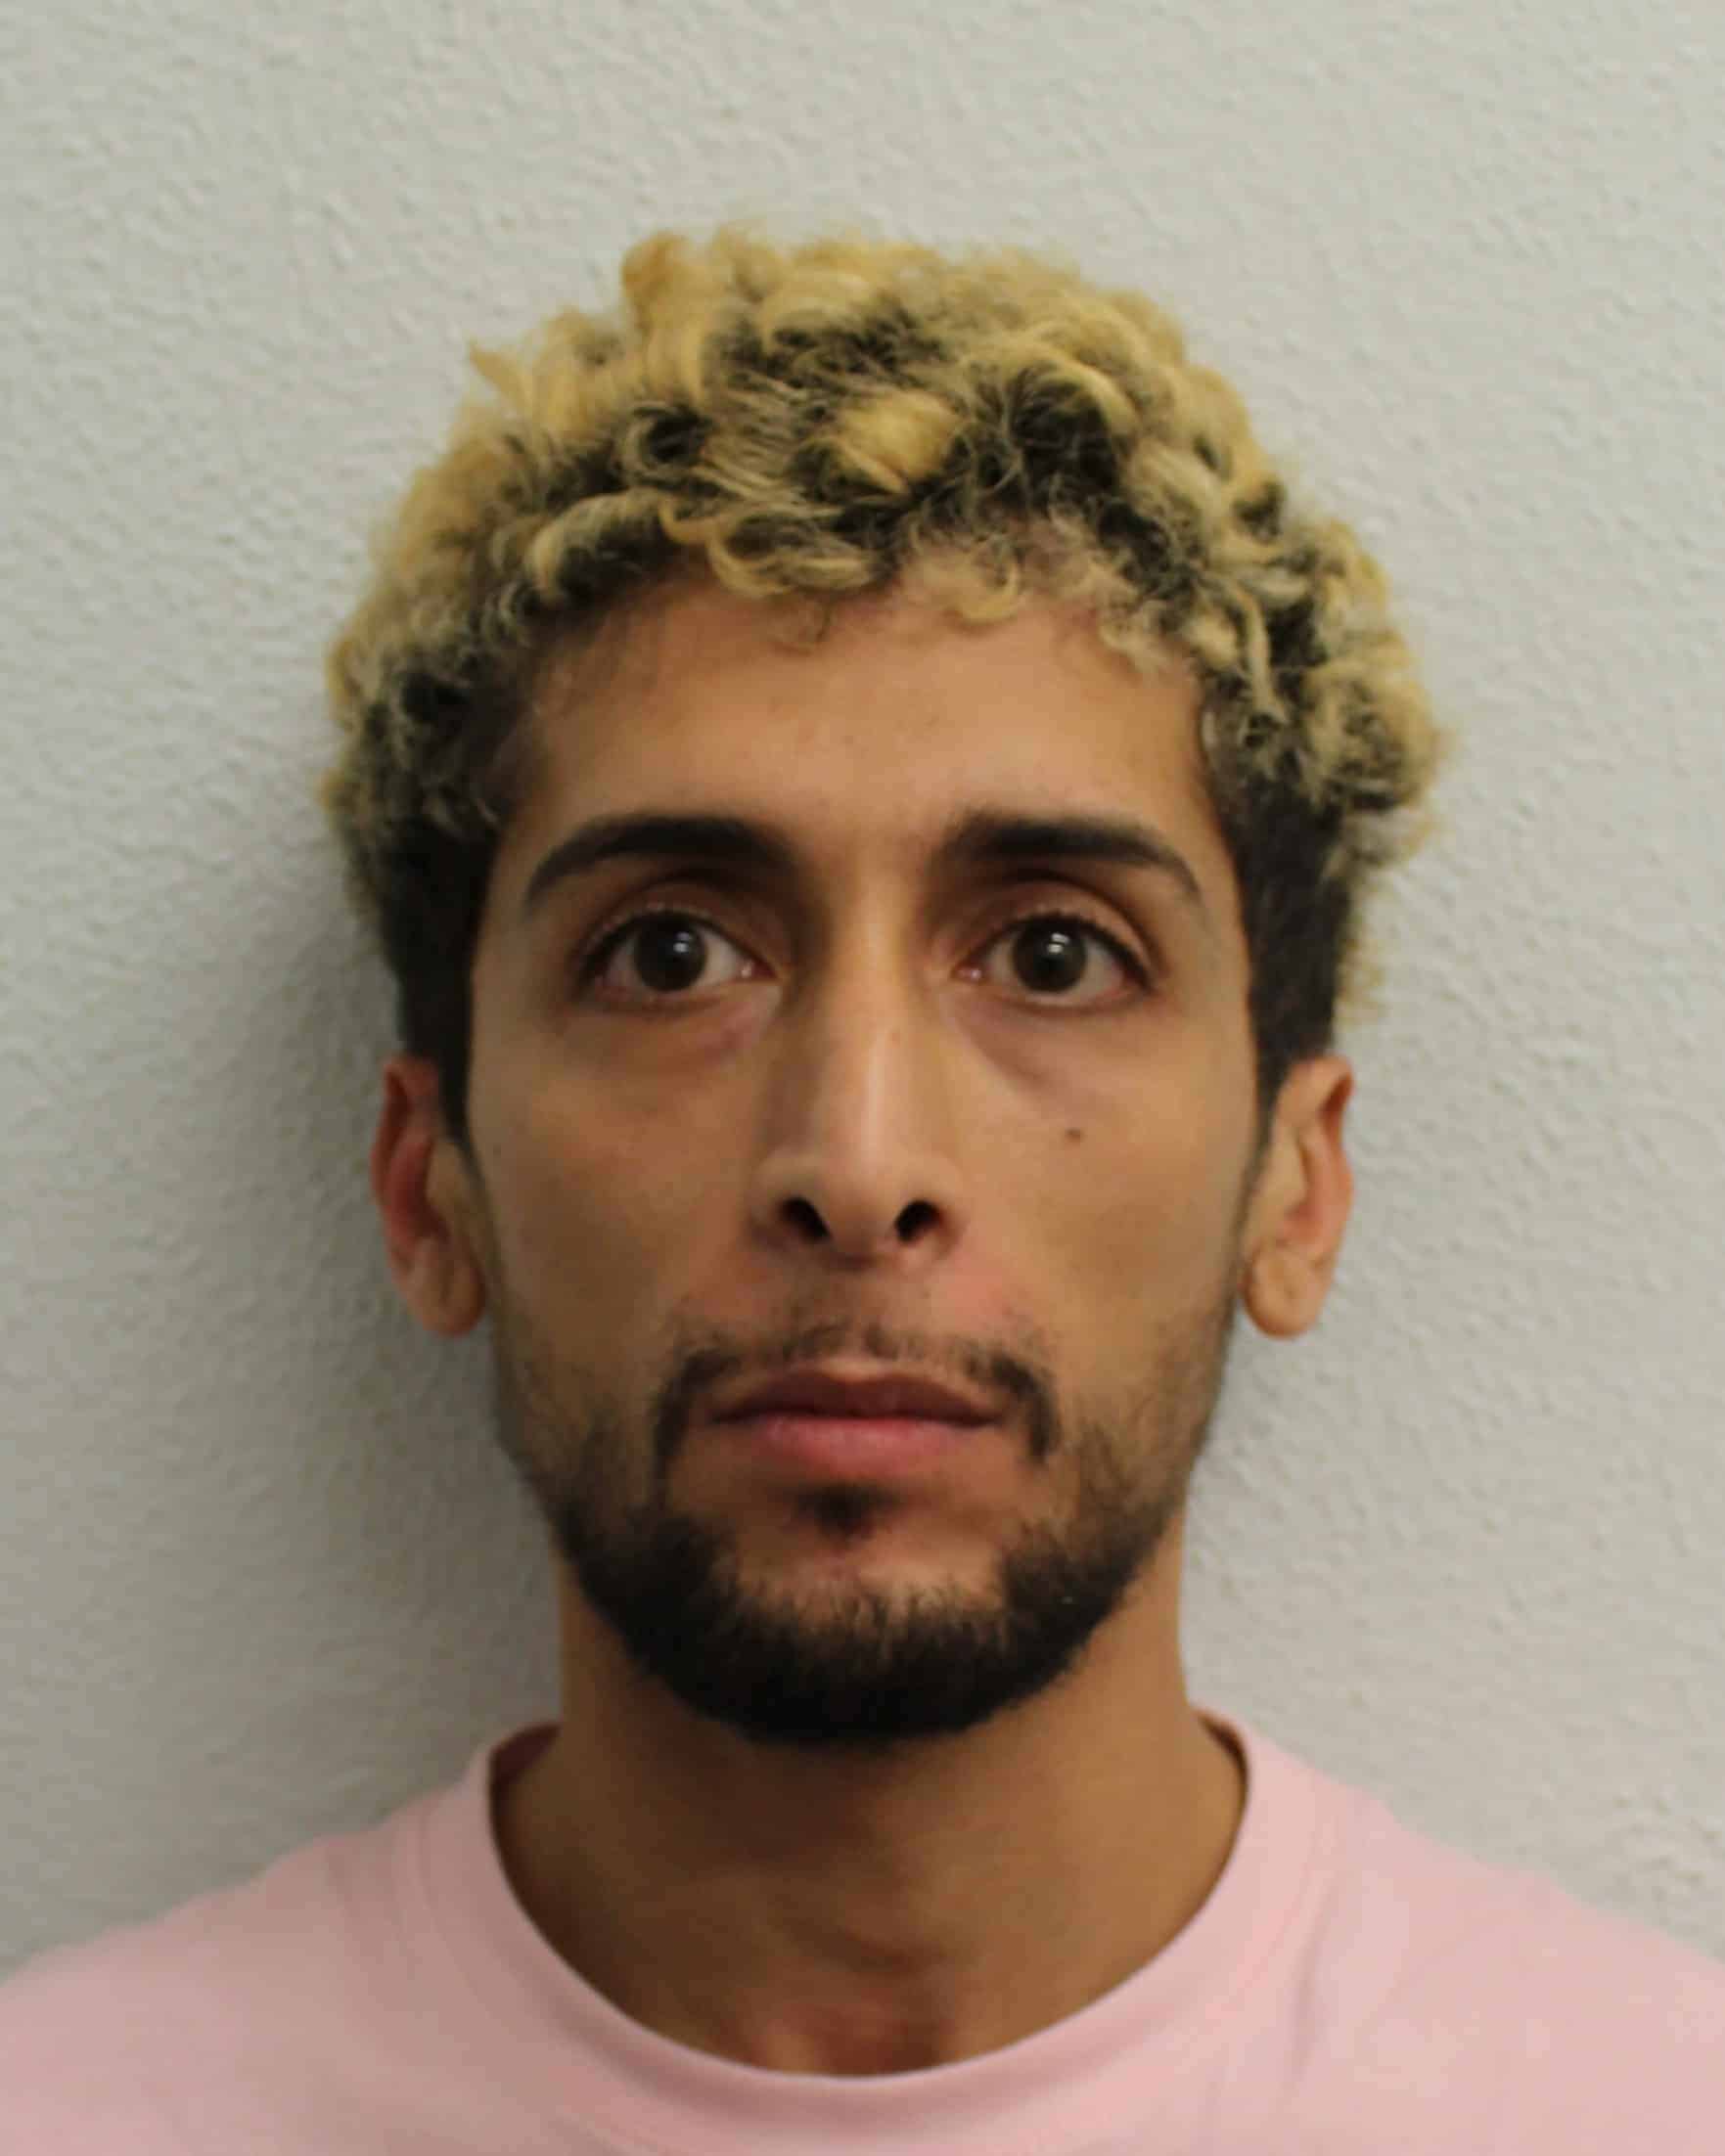 Nasty Spineless Borough Man Jailed For Five Years For Blackmailing People He Met On Gay 